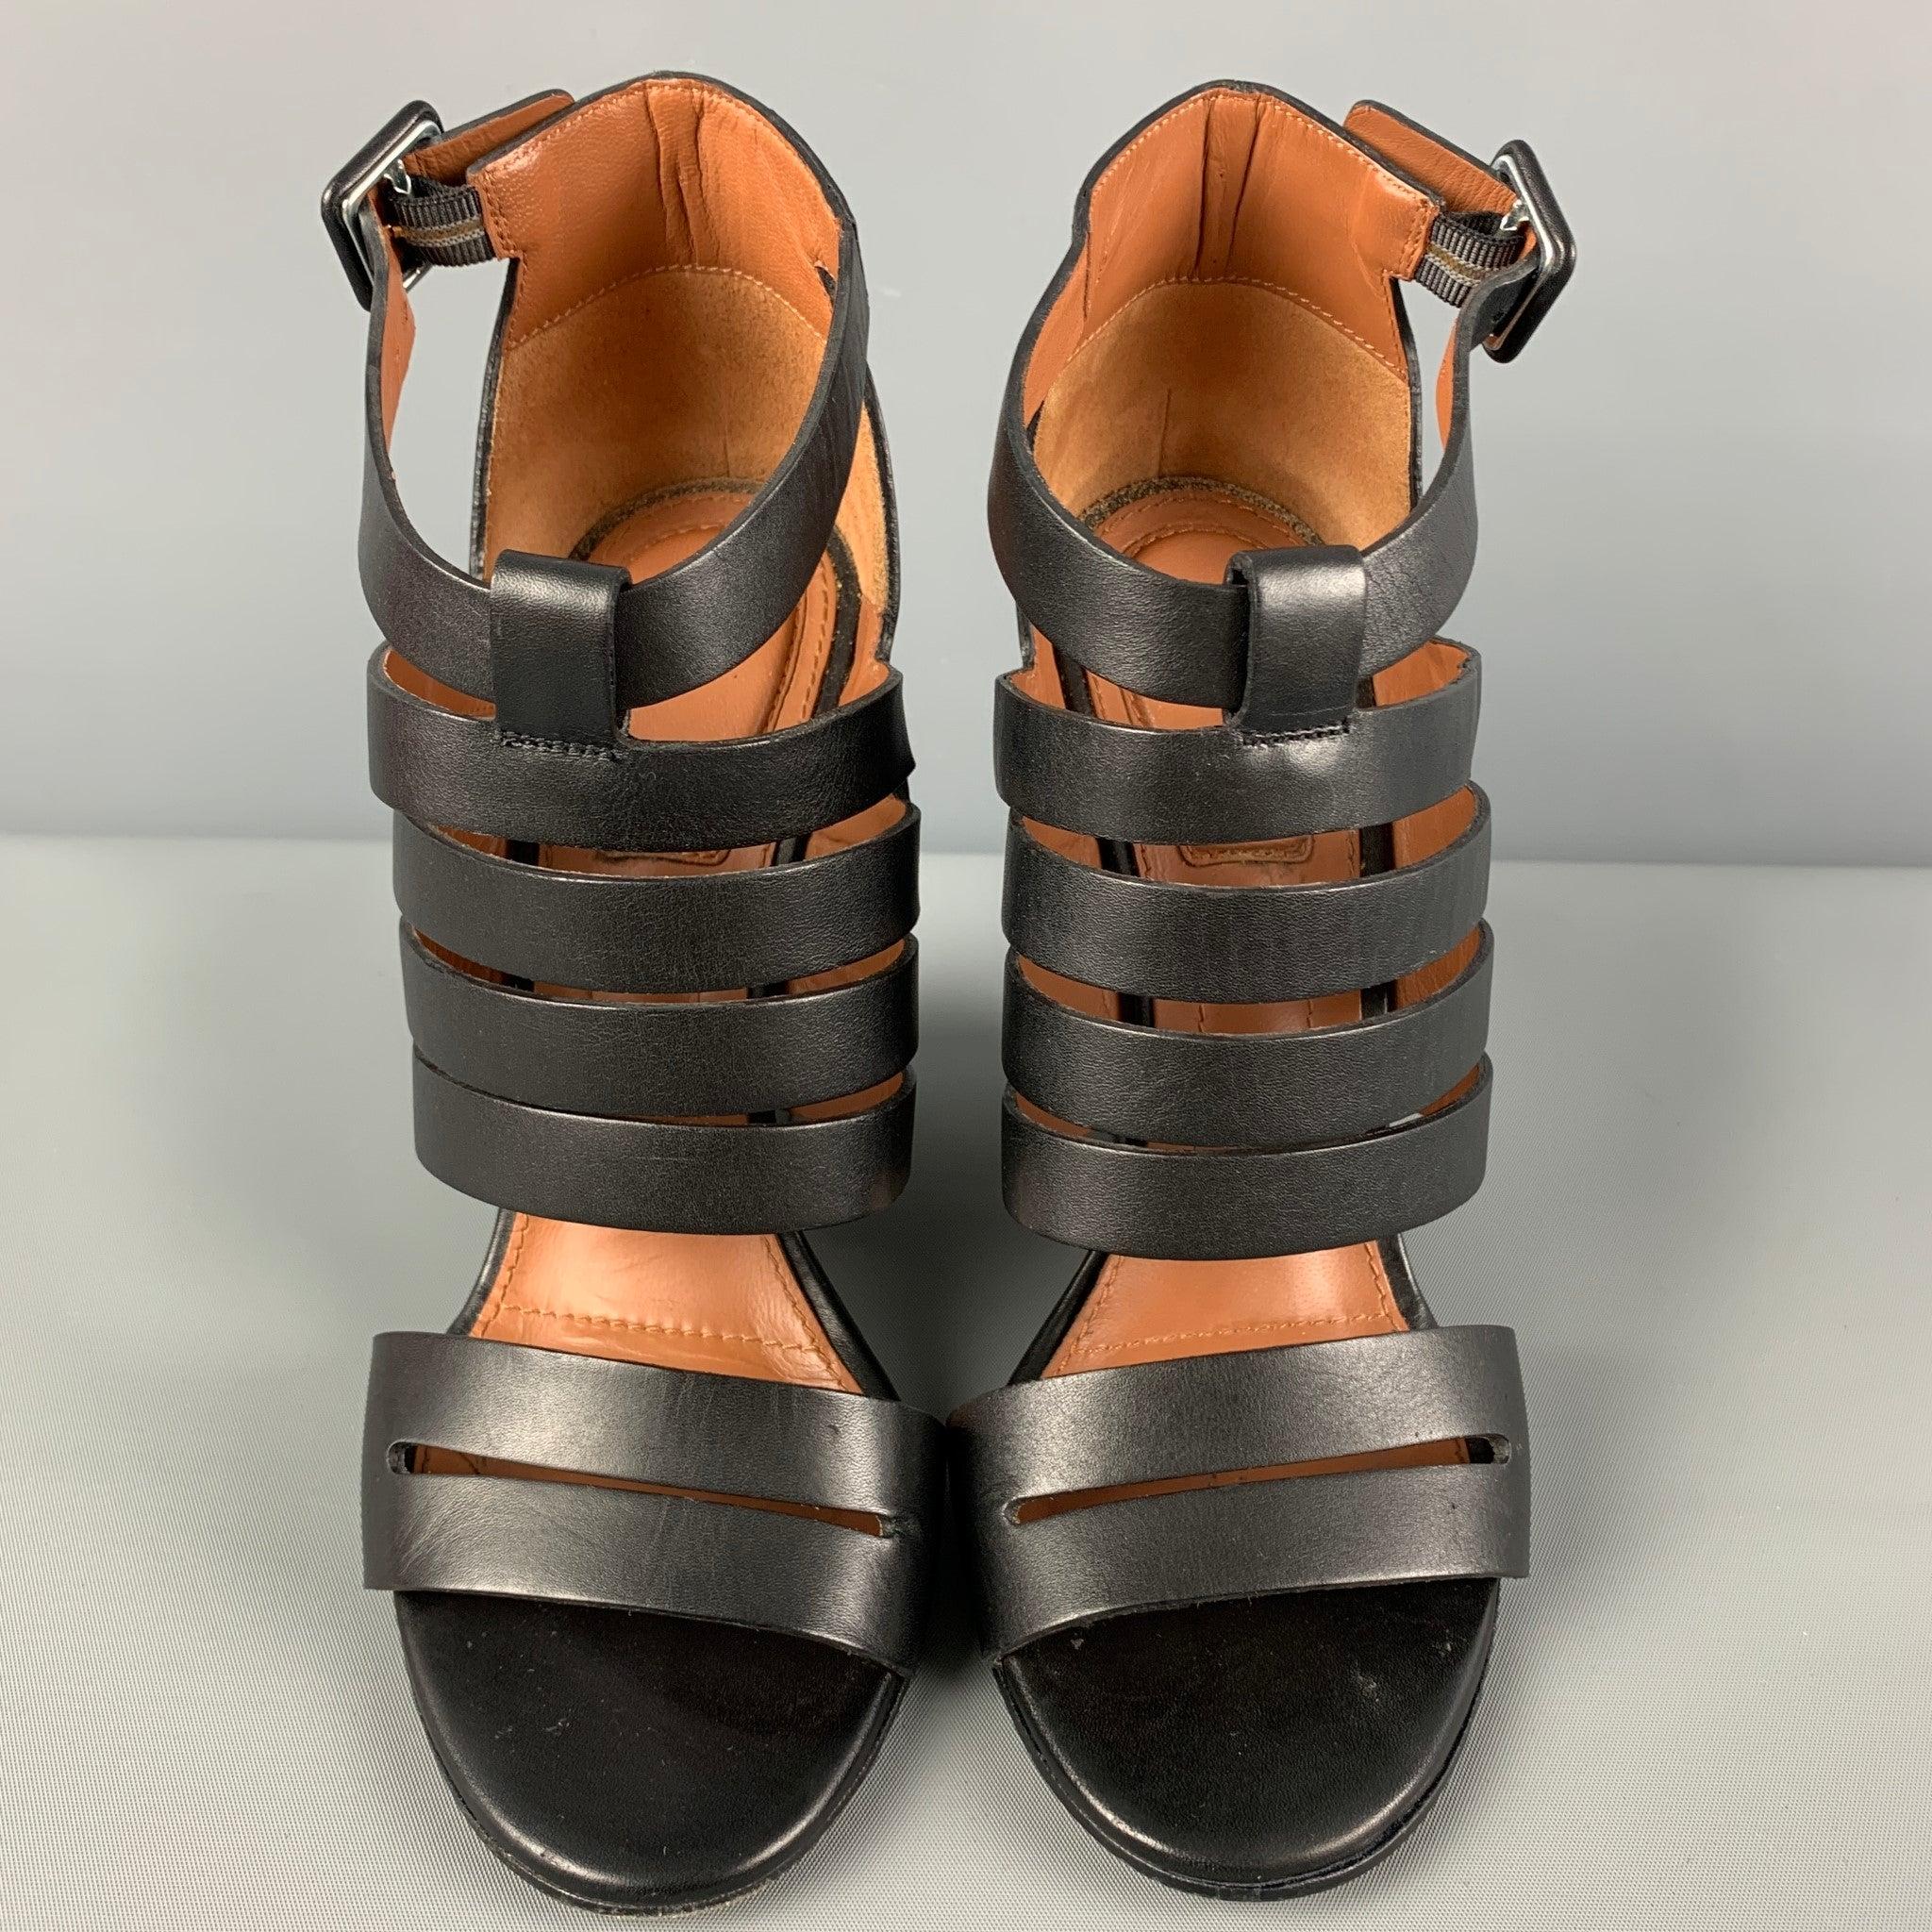 Women's GIVENCHY Size 6.5 Black Metal Wedge Sandals